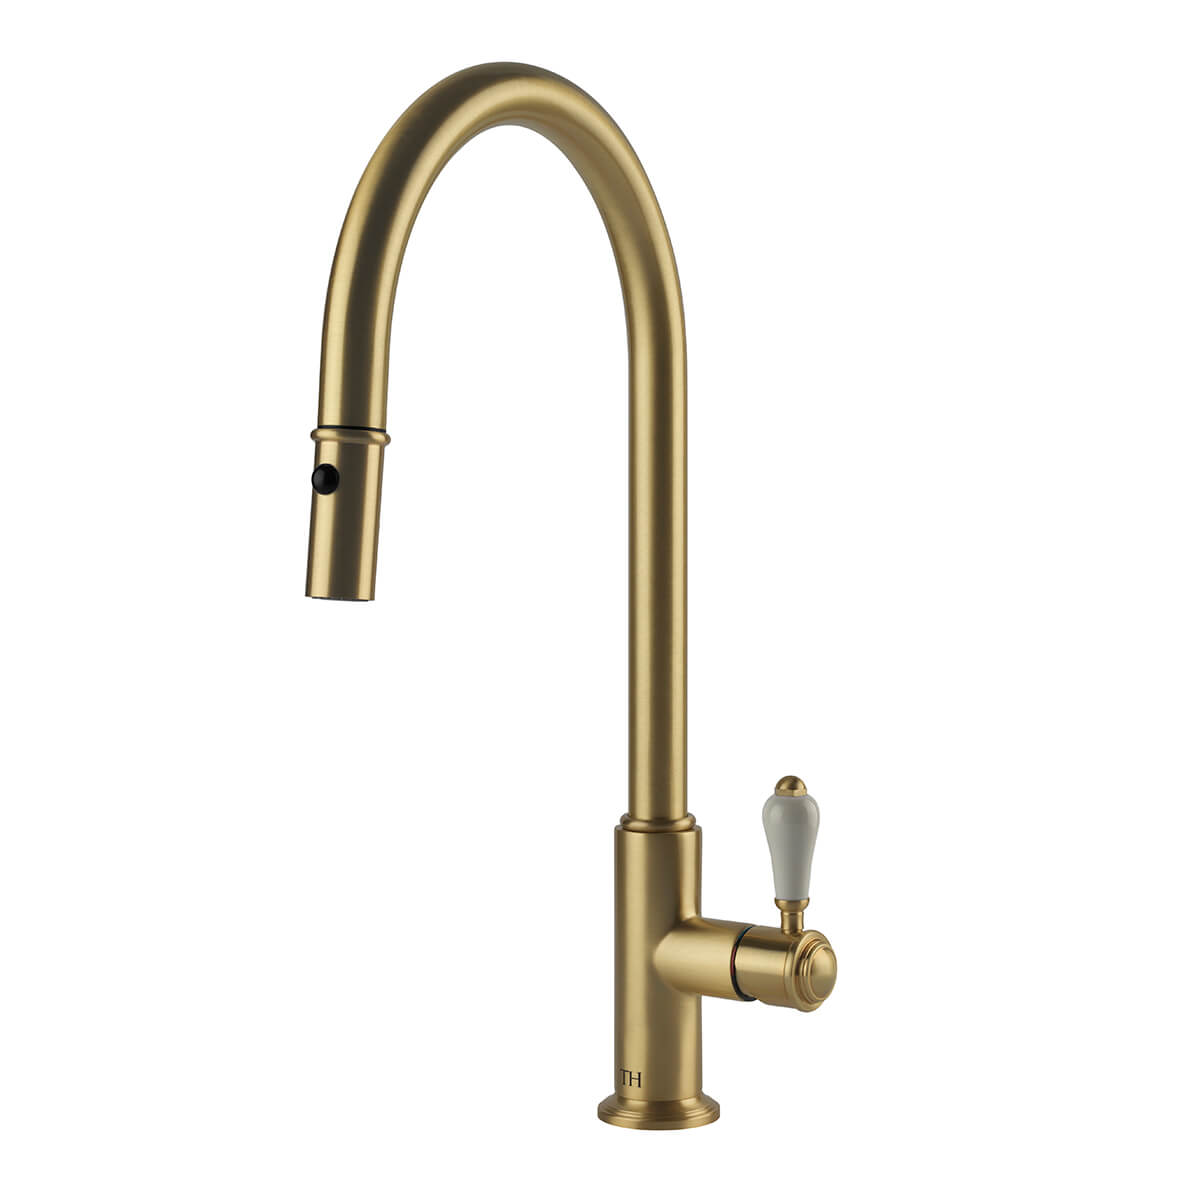 TURNER HASTINGS LUDLOW PULL OUT SINK MIXER 418MM BRUSHED BRASS (CERAMIC HANDLE)